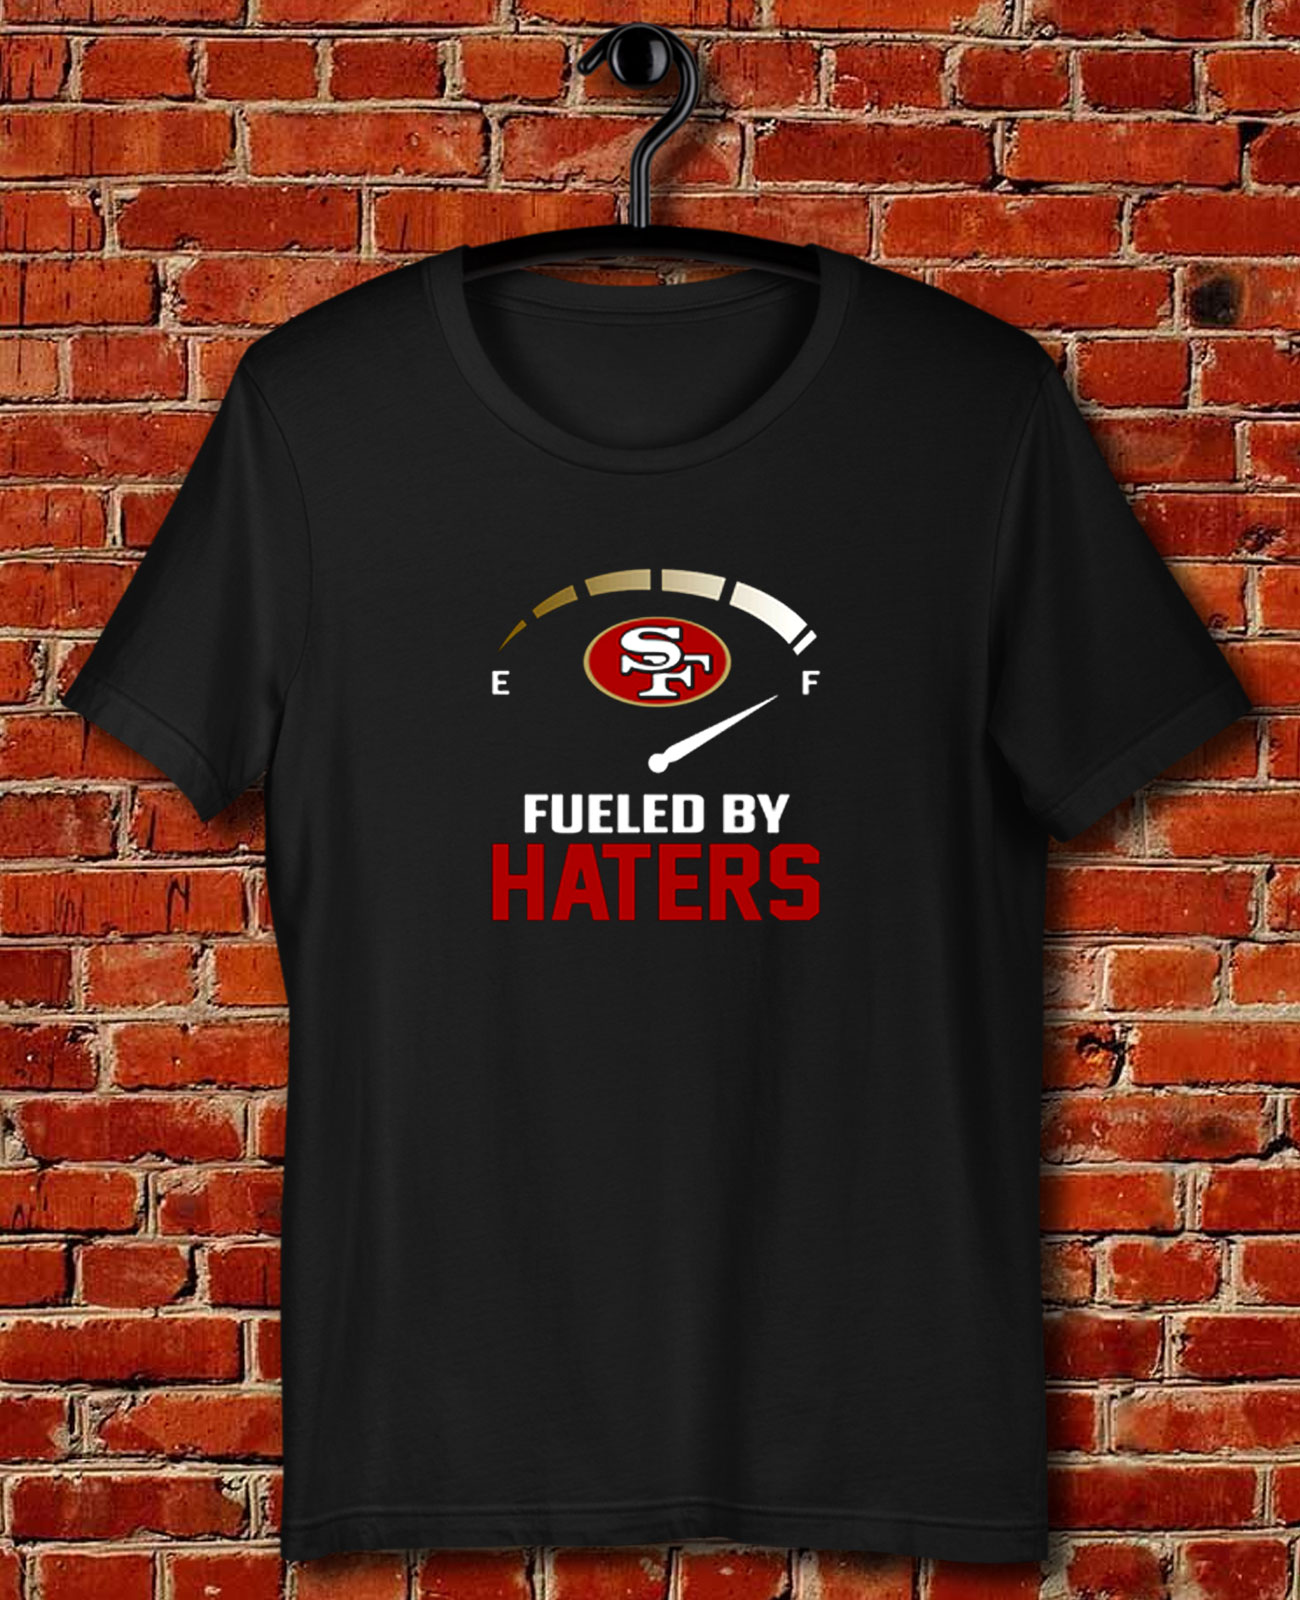 49ers quotes